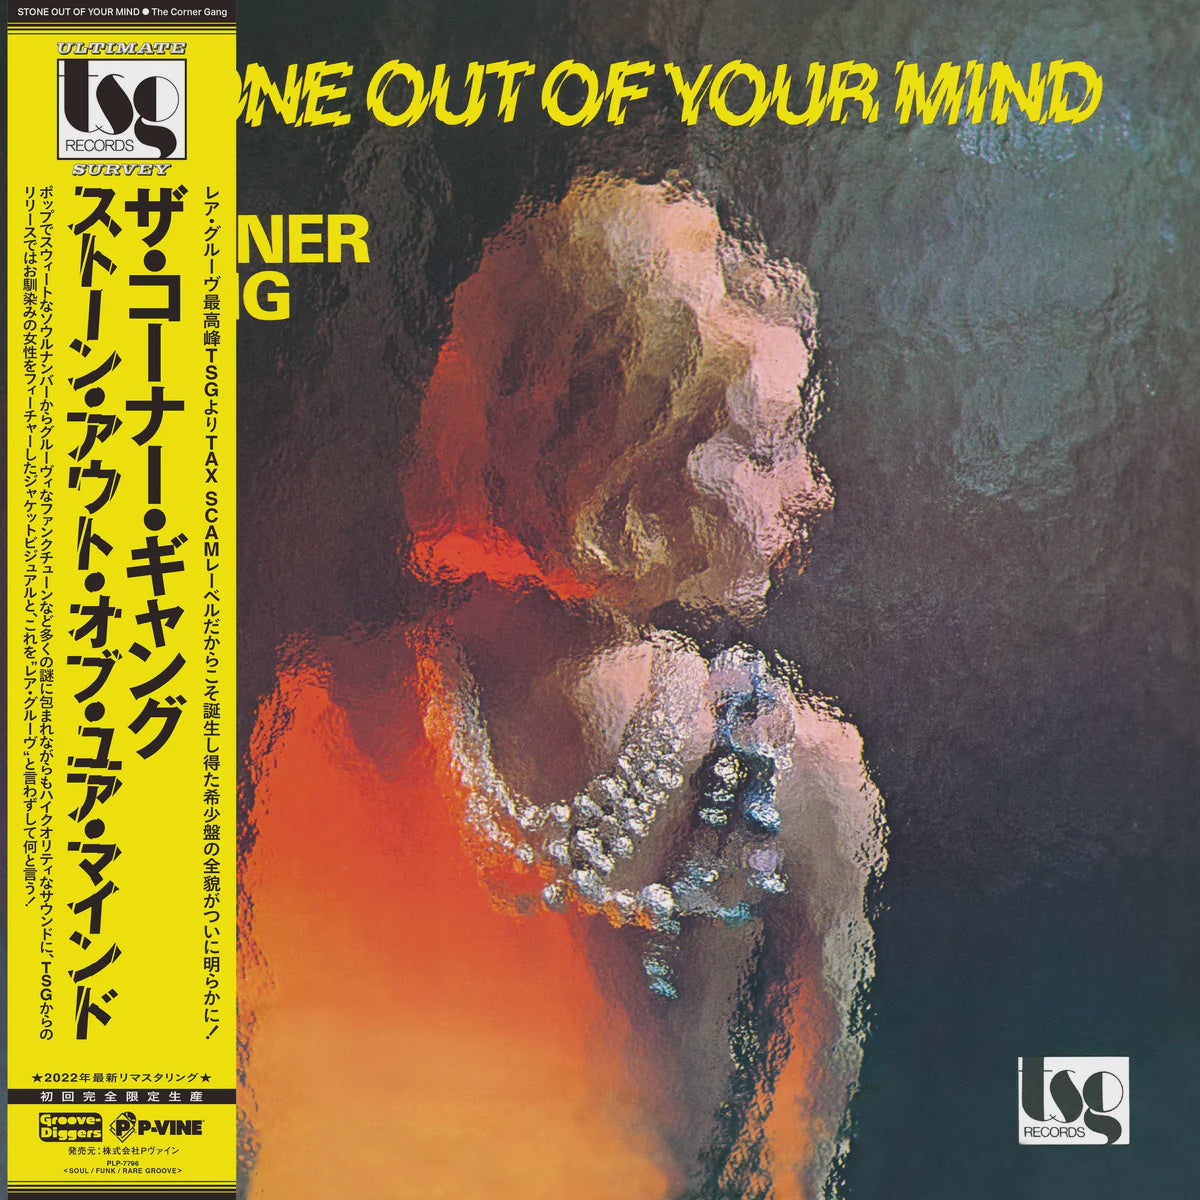 The Corner Gang – Stone Out Of Your Mind